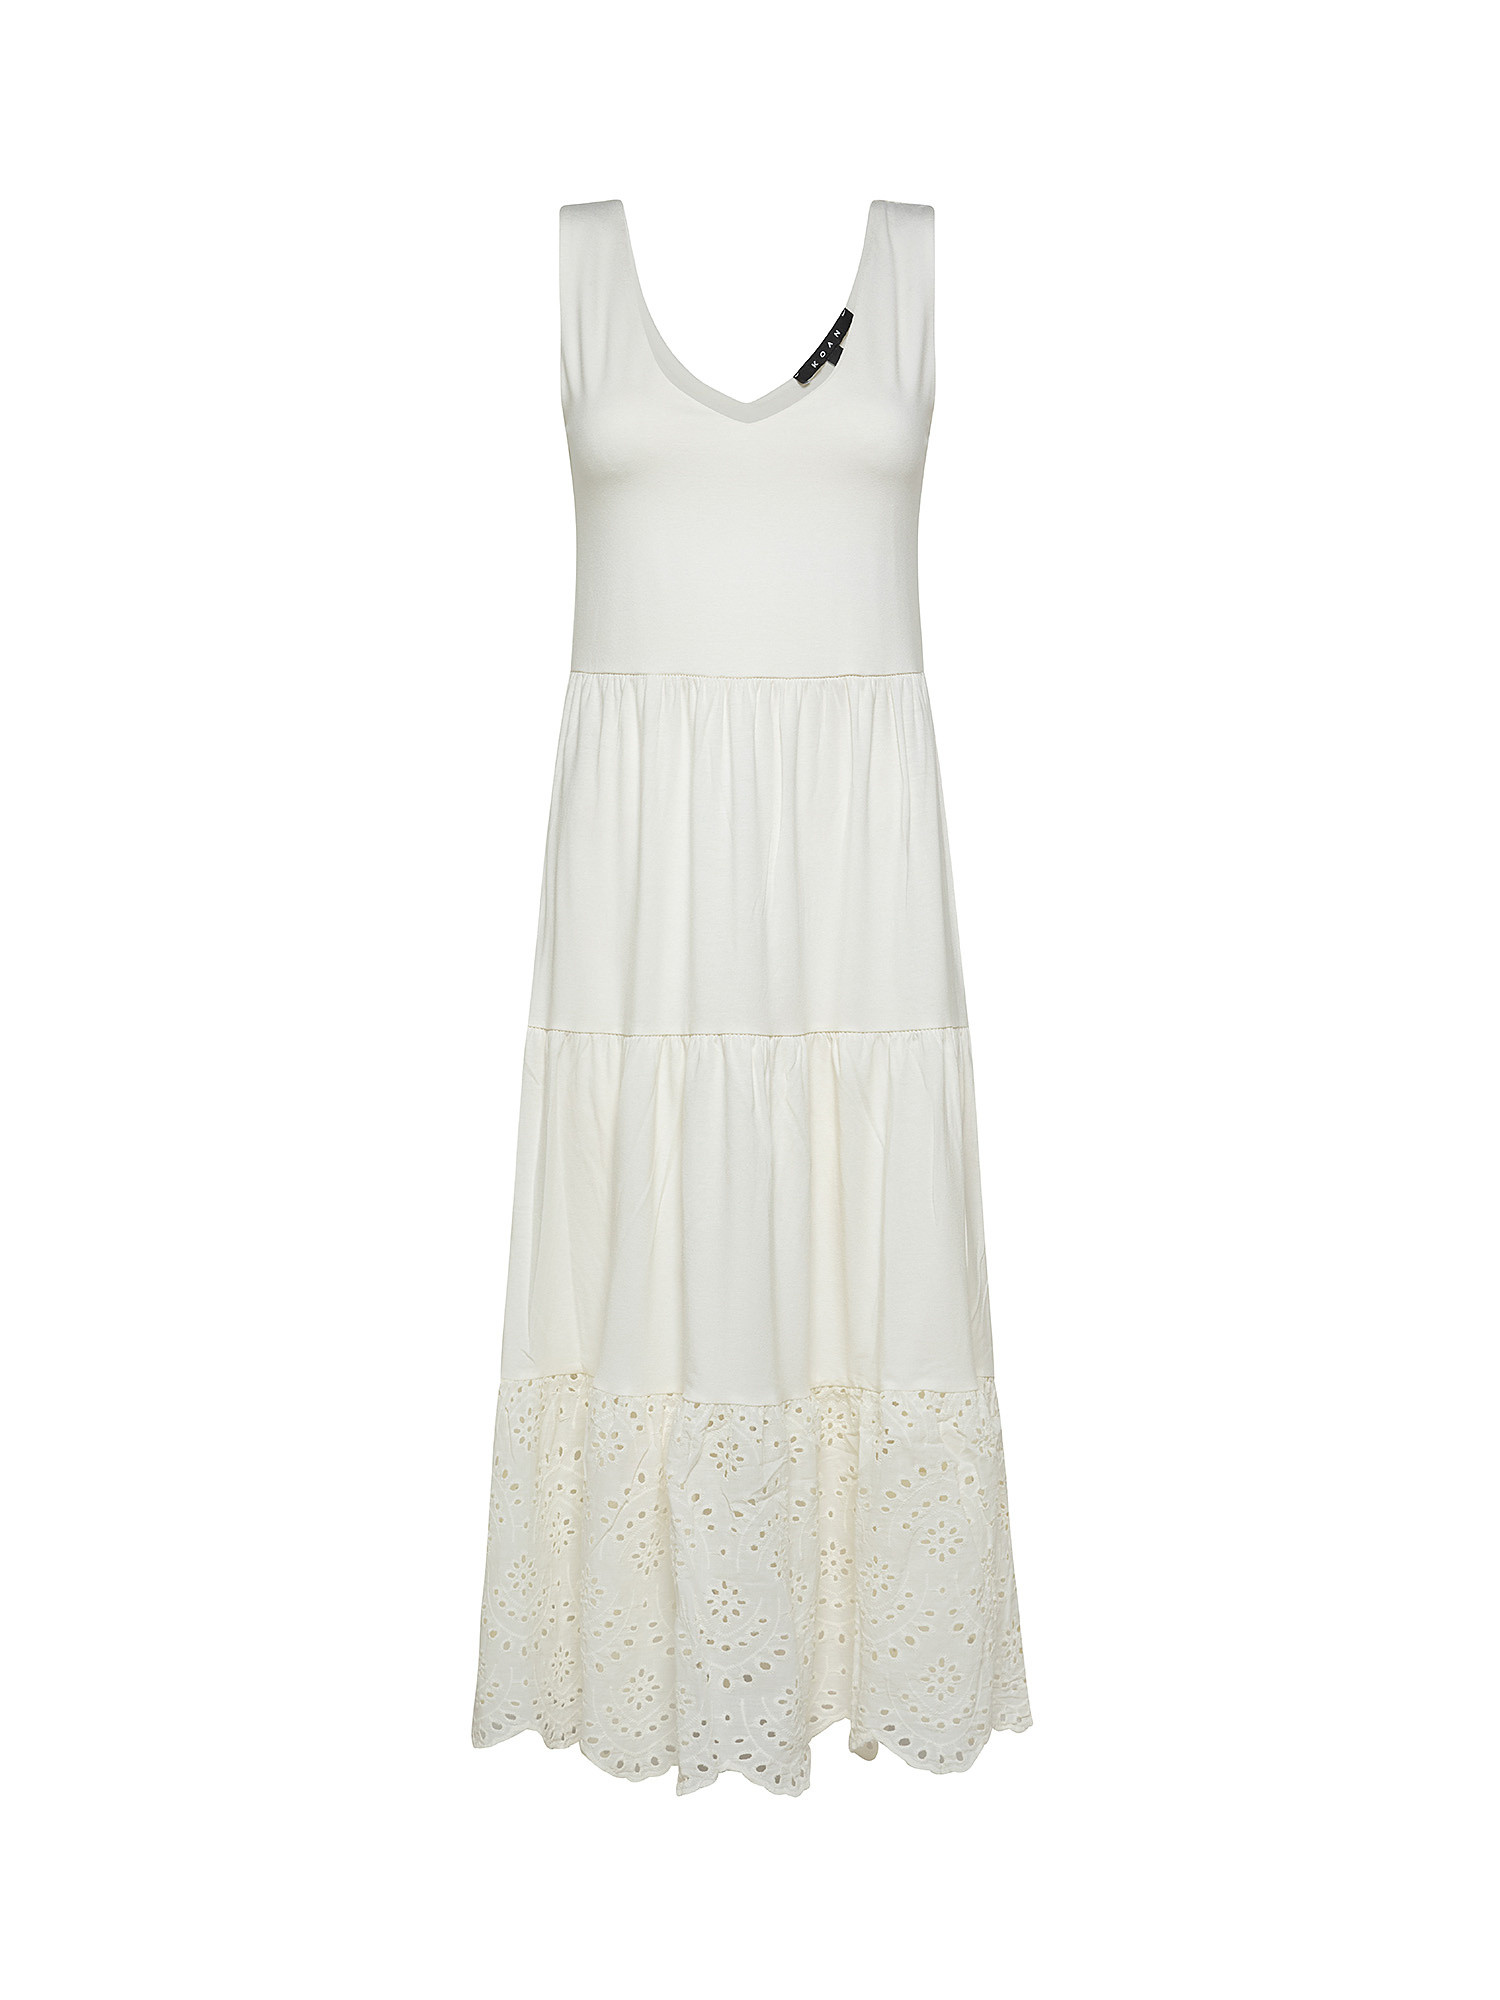 Dress with flounces, White, large image number 0